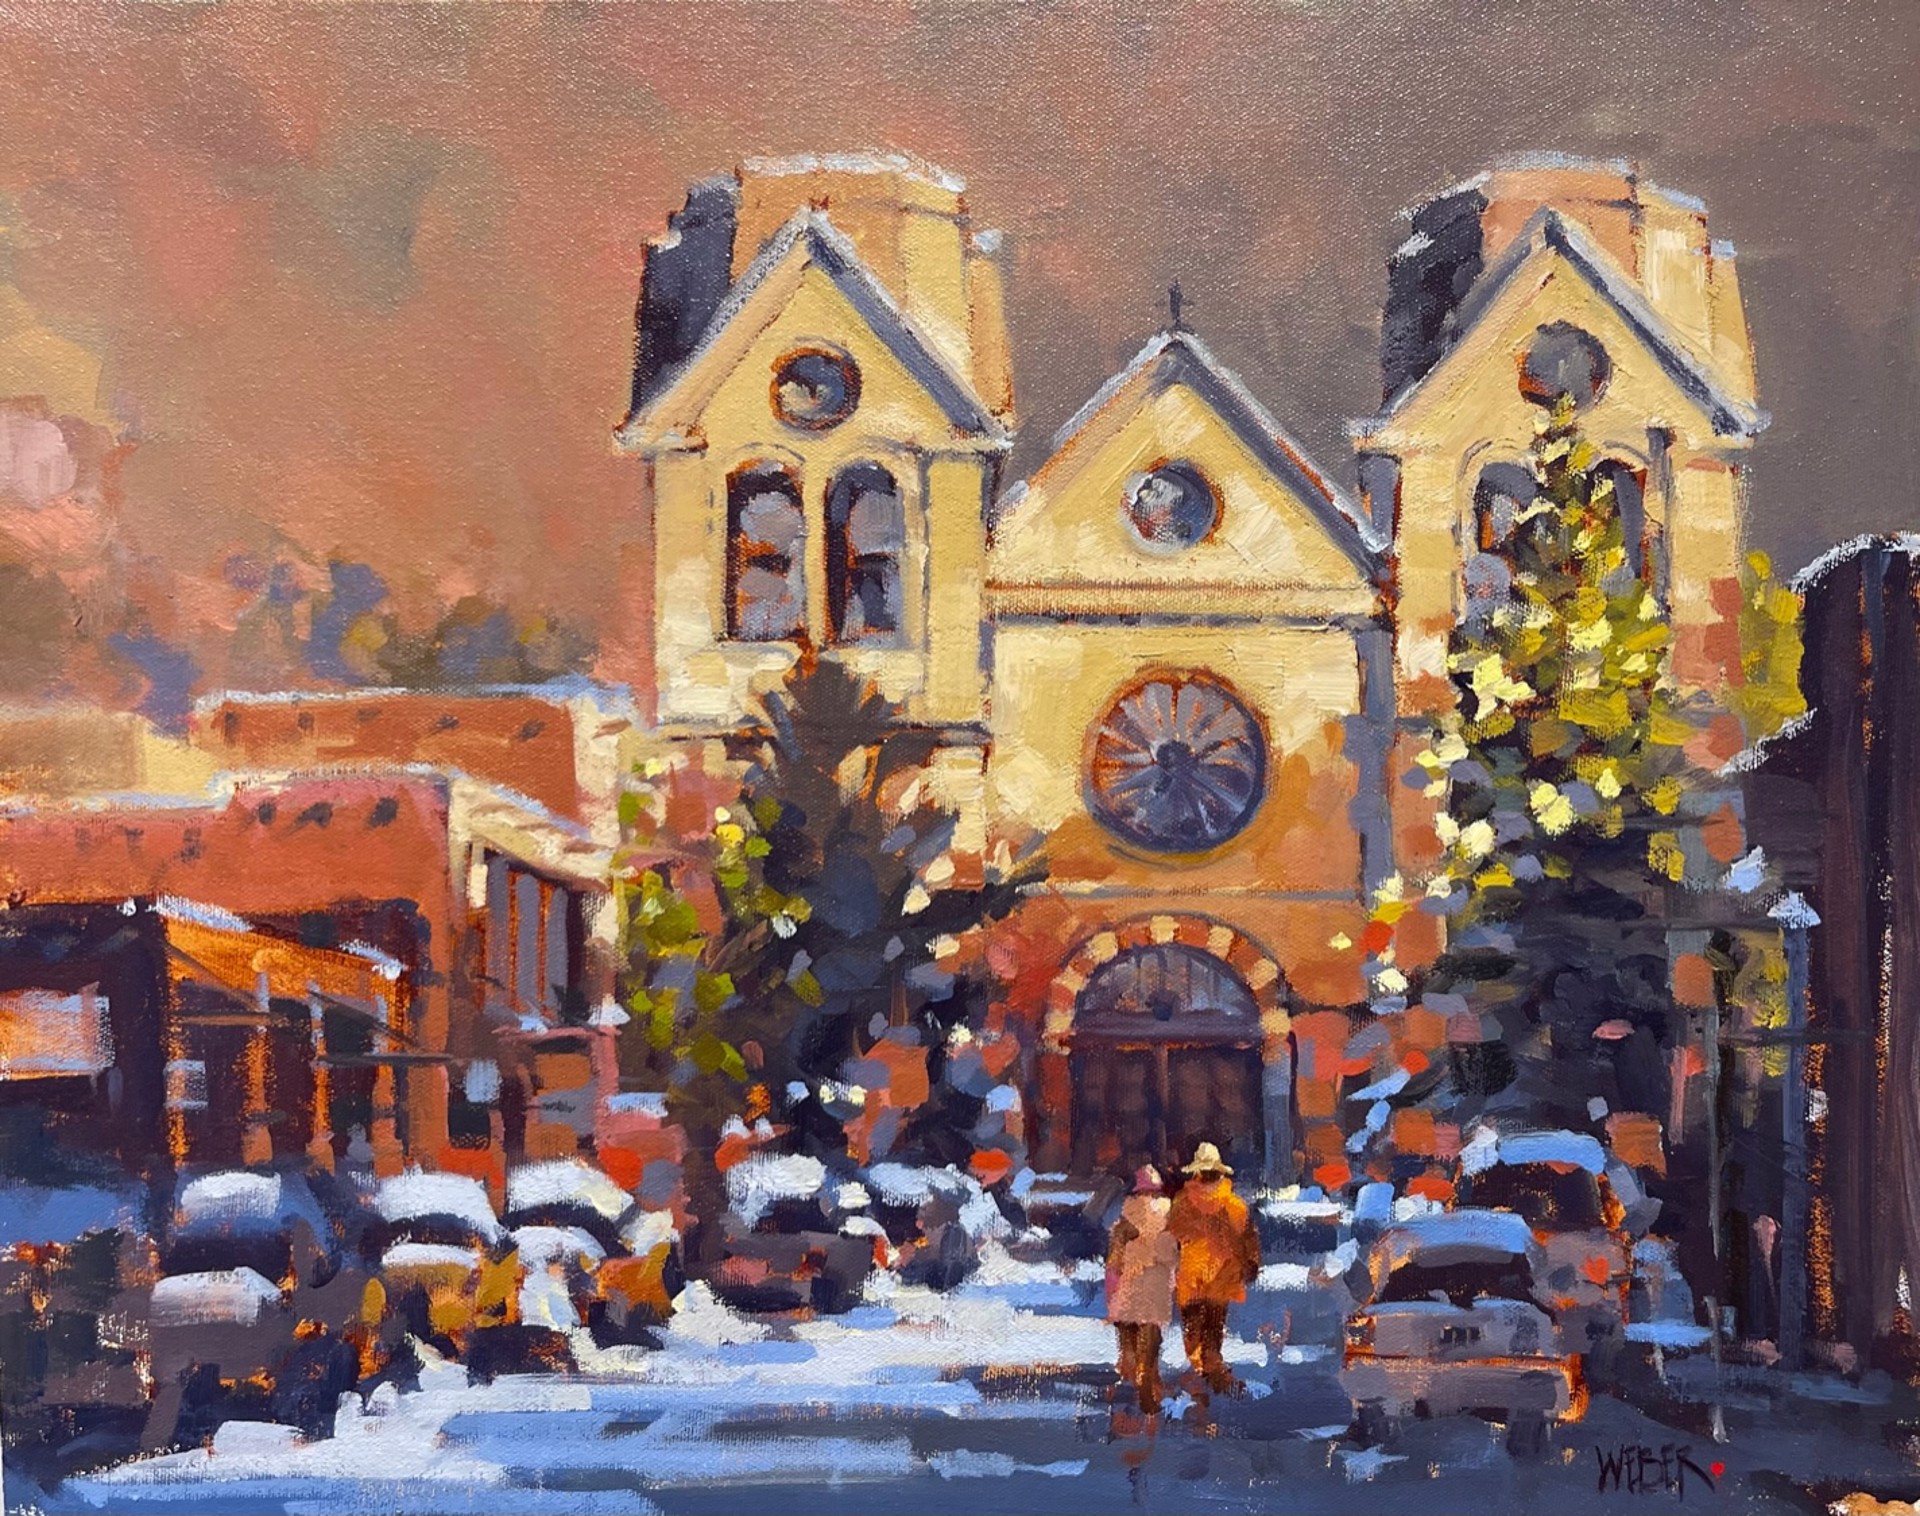 Snowy Morning Walk to Service by Donald Weber